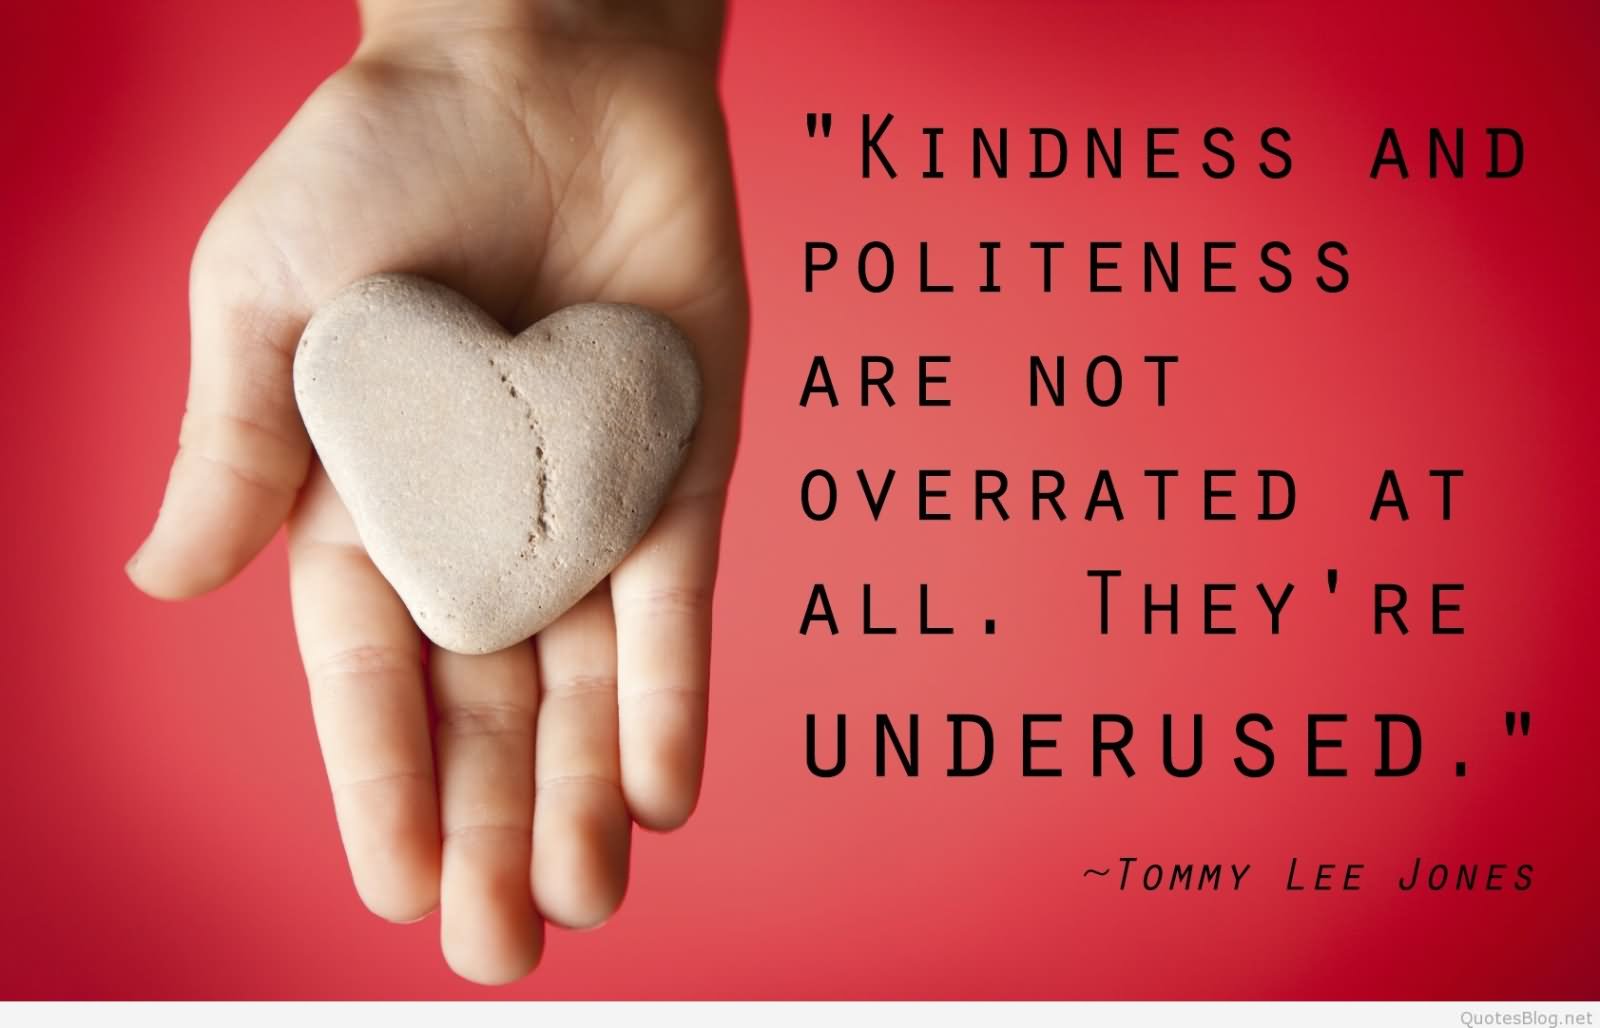 Kindness and politeness are not overrated at all. They're underused.  - Tommy Lee Jones